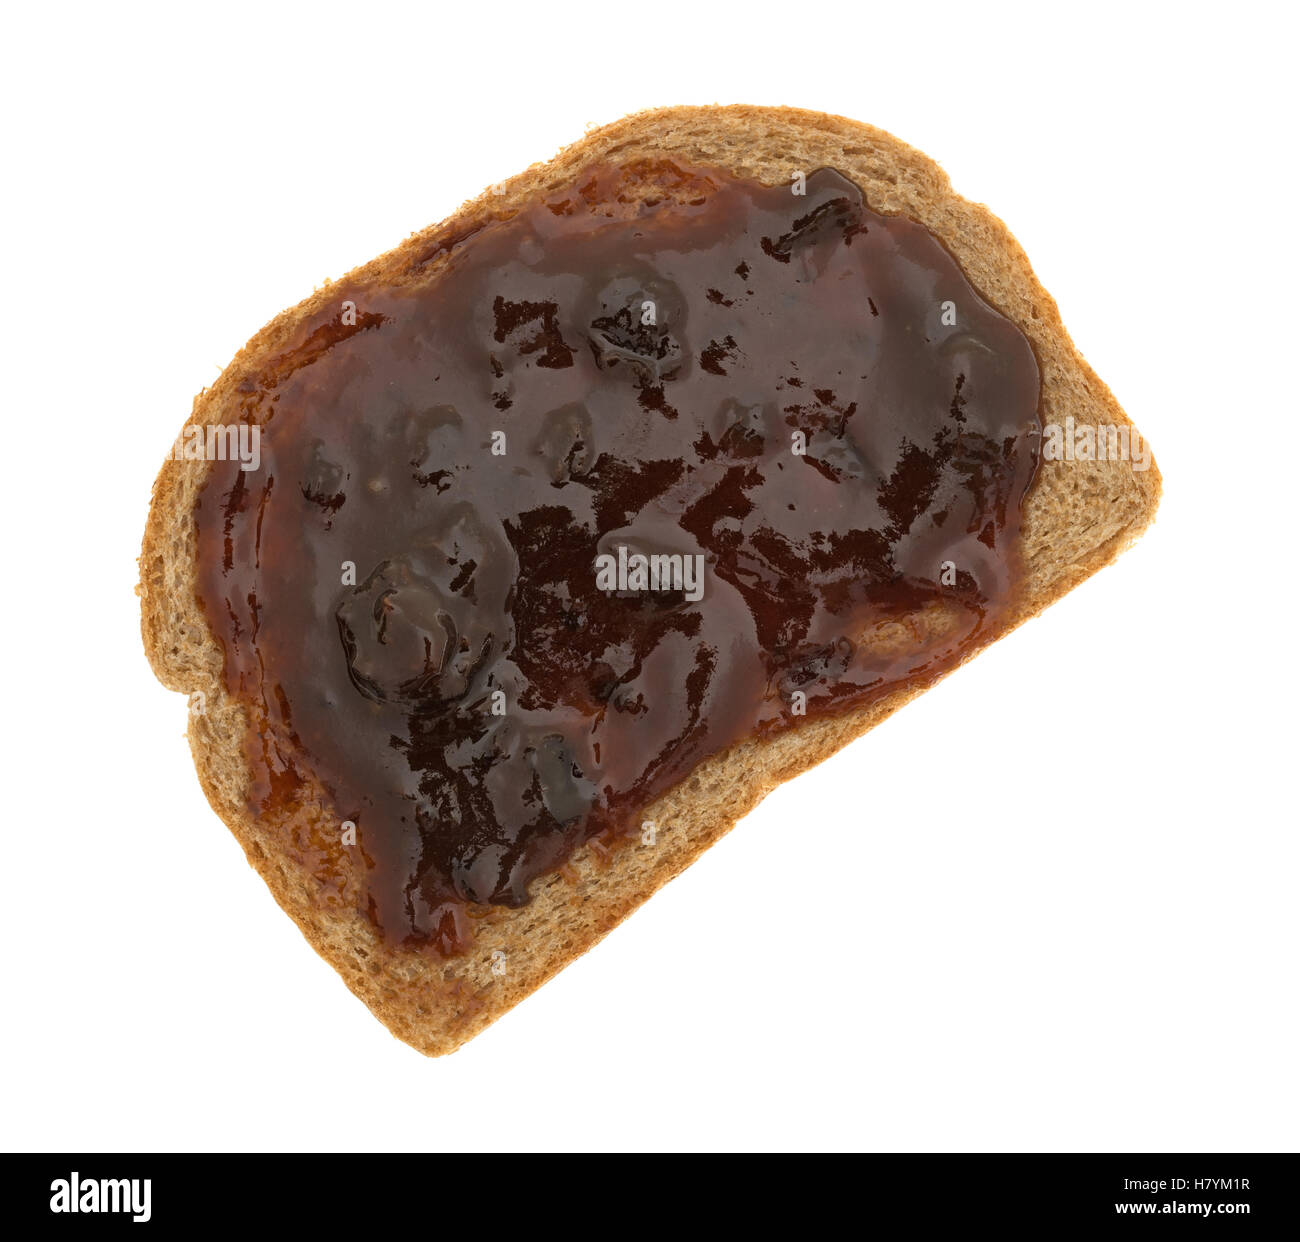 Top view of plum preserves spread on a piece of wheat bread isolated on a white background. Stock Photo